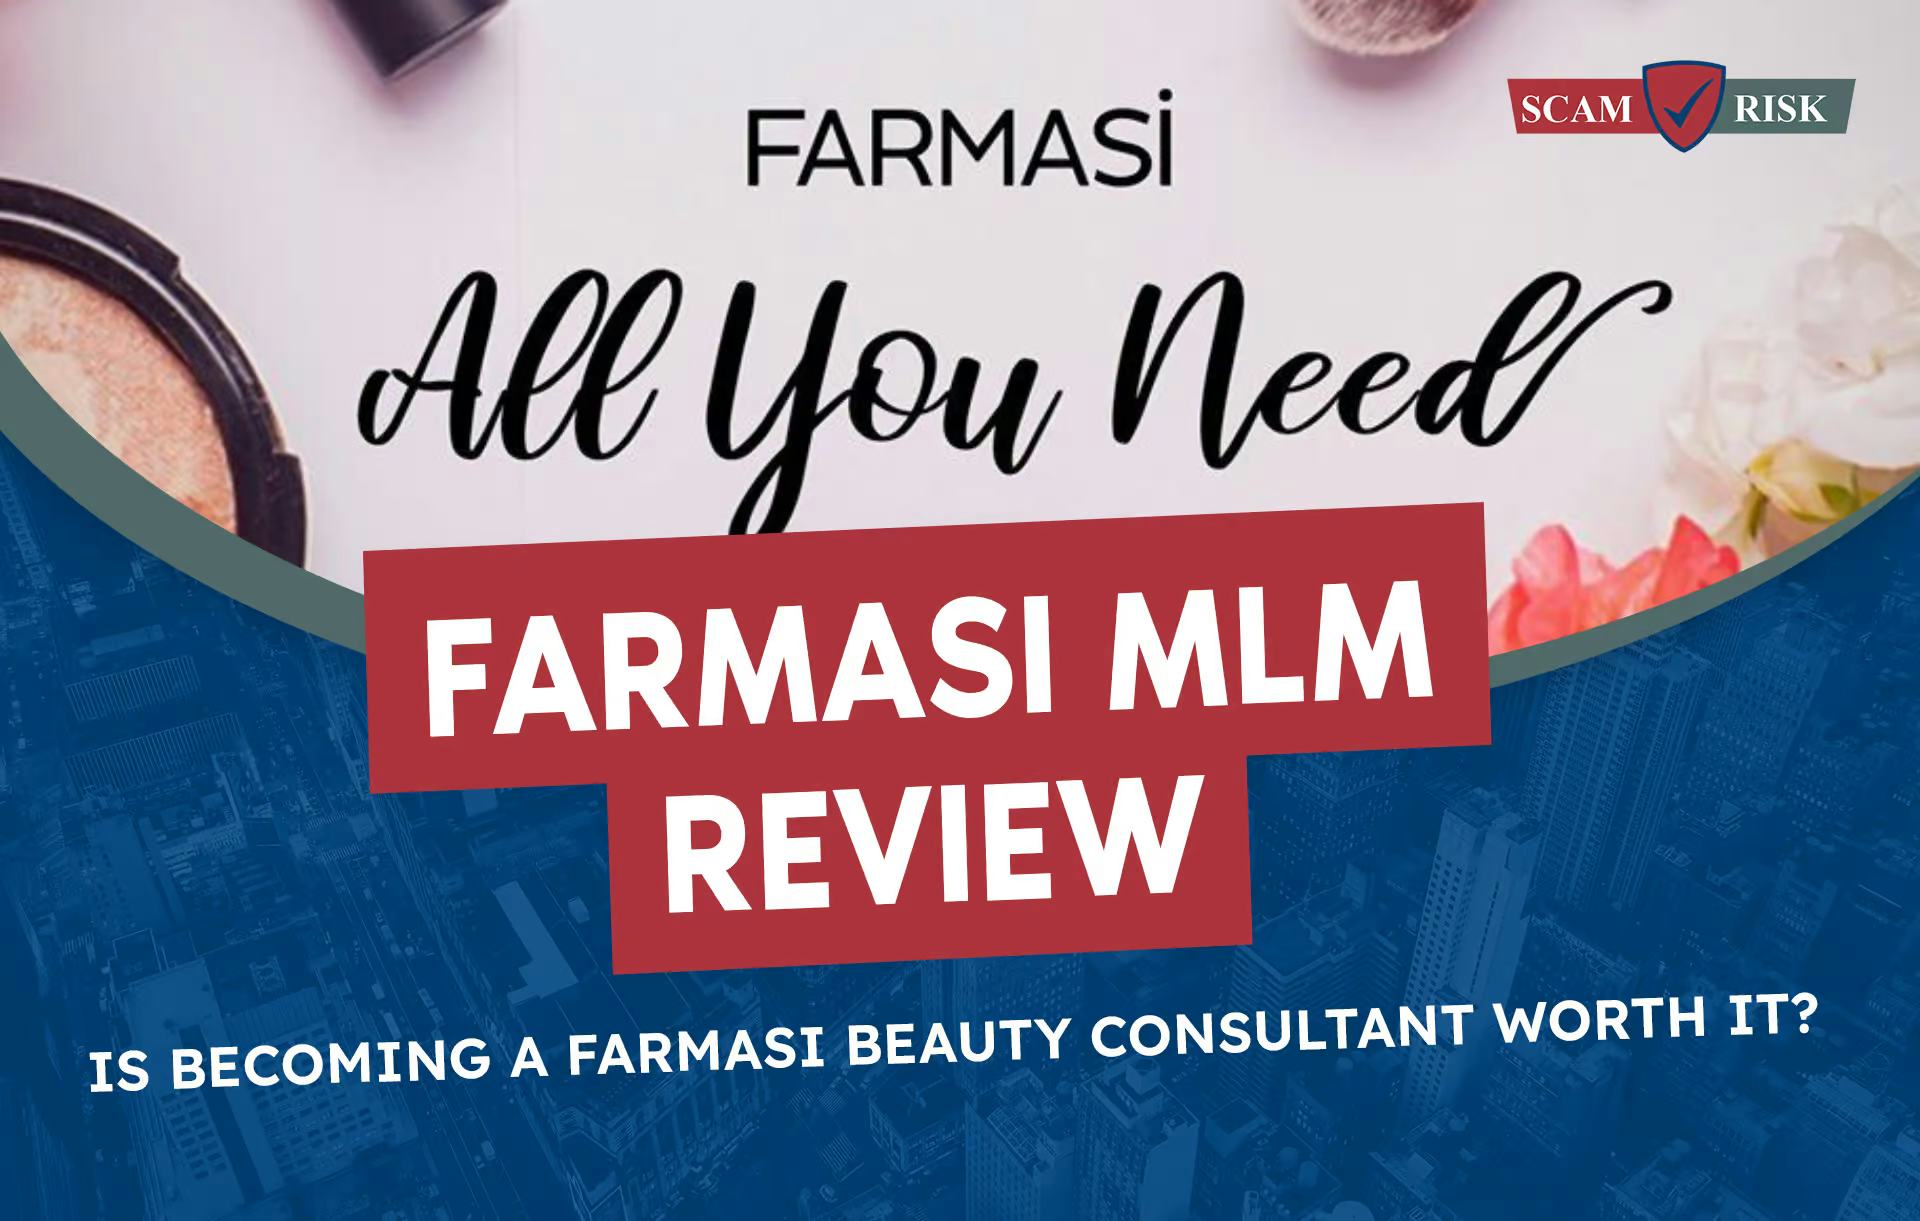 Farmasi Reviews: Is It Just Another MLM Scheme?